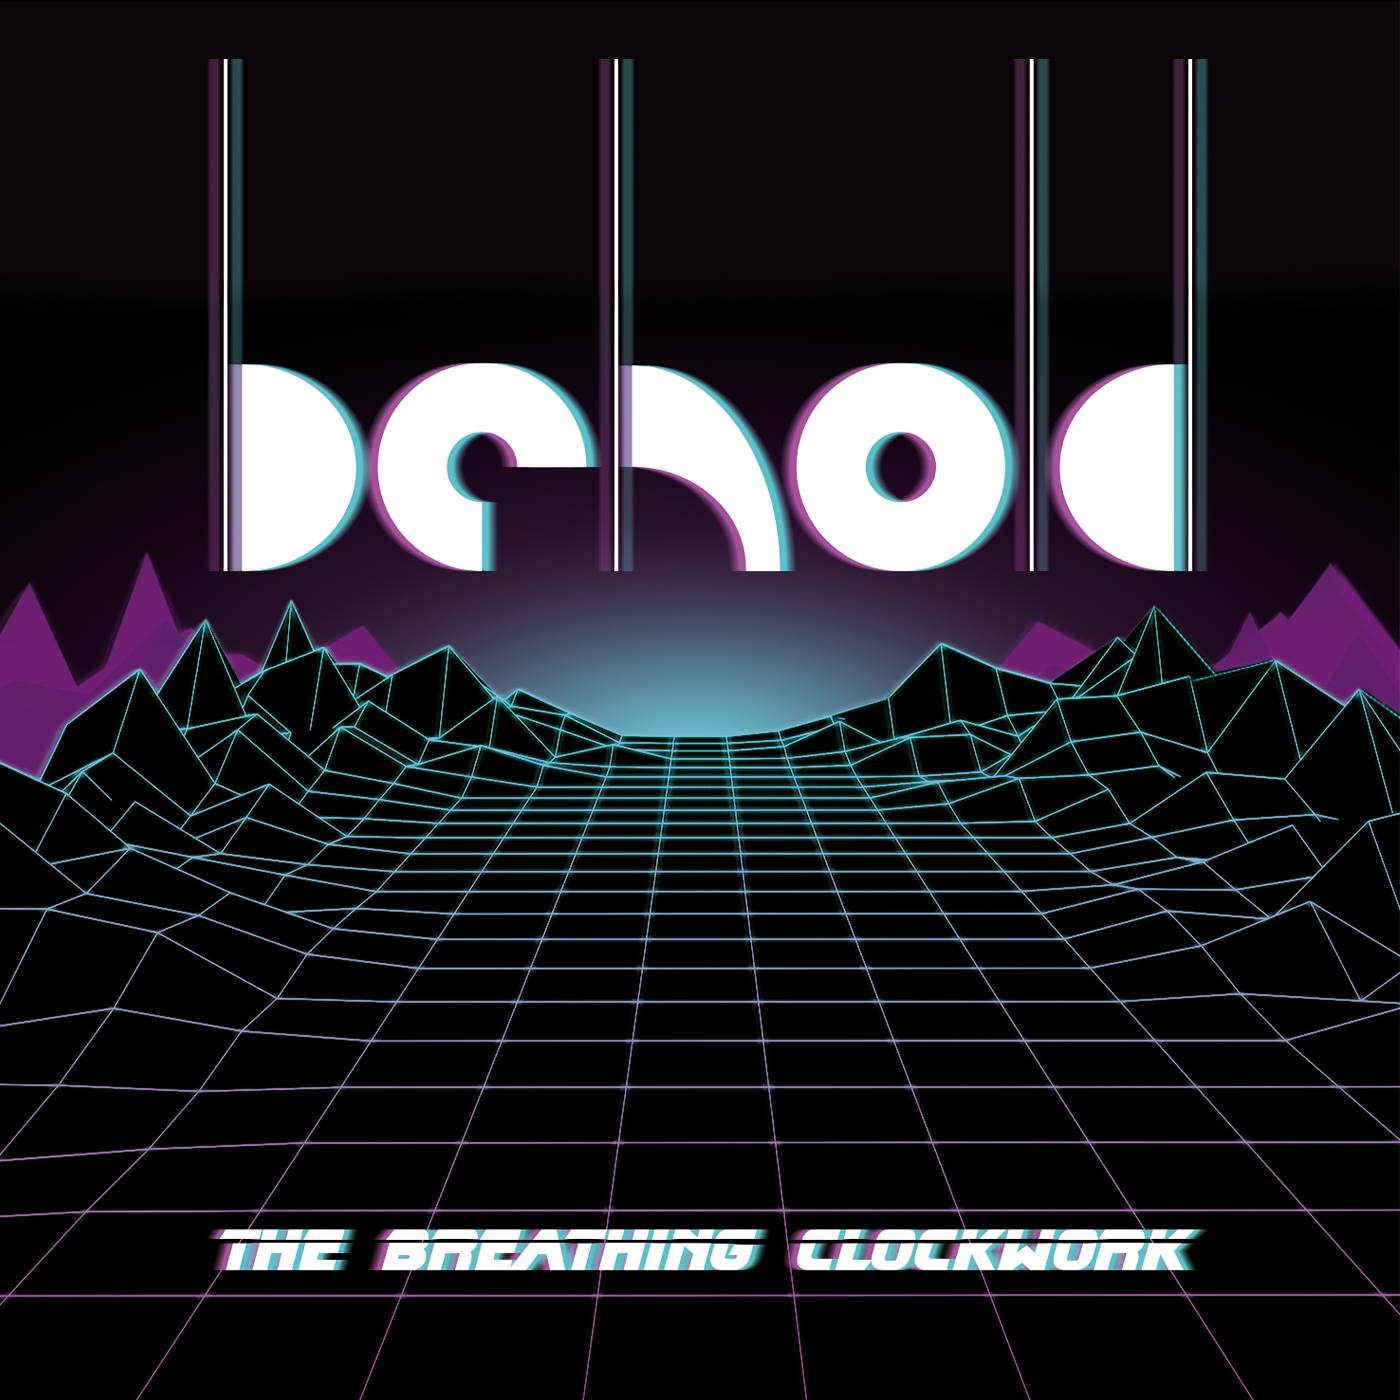 Behold - The Breathing Clockwork (#spamindierecords)